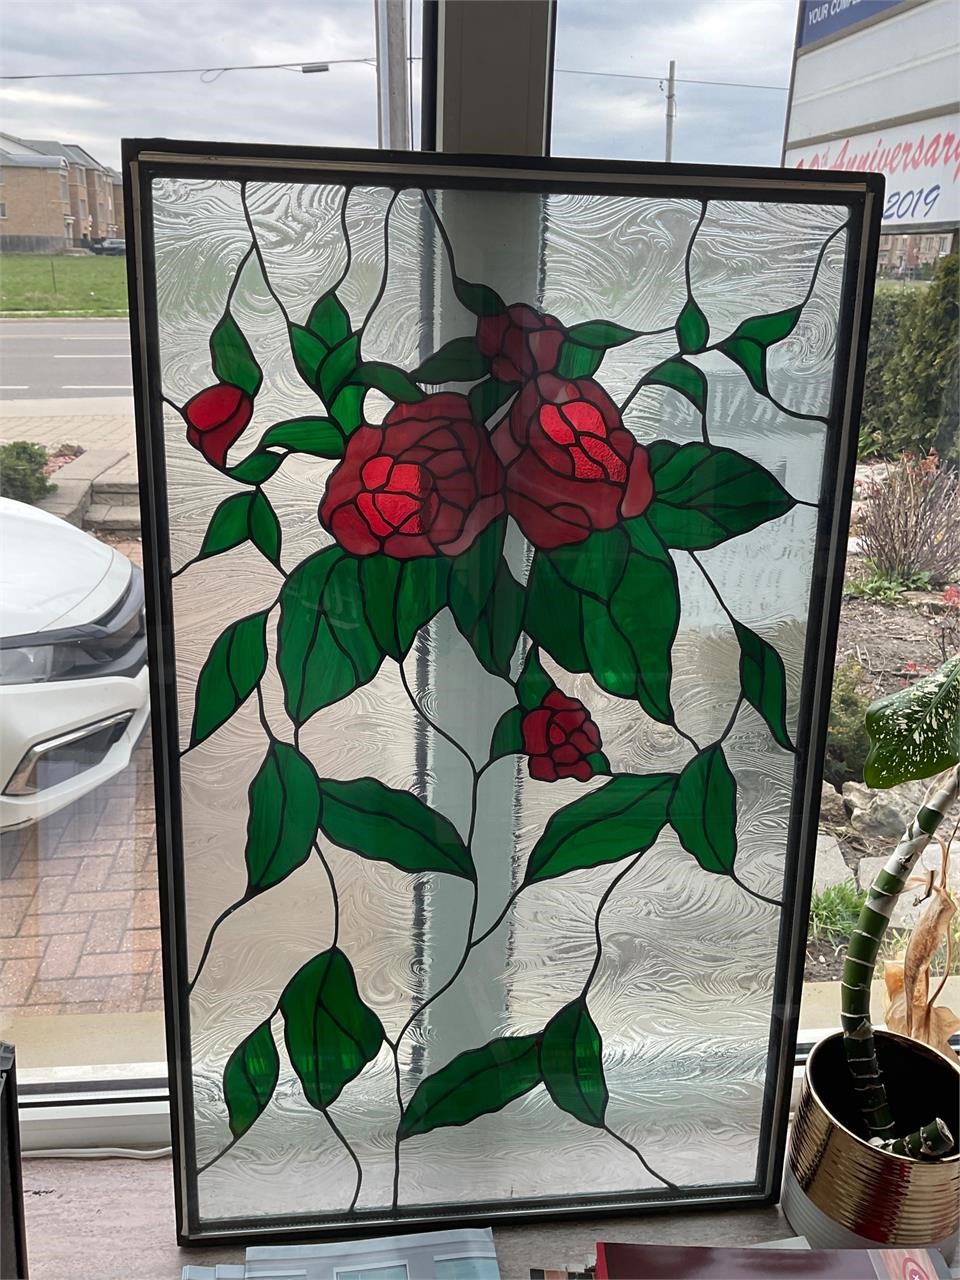 Stained glass art